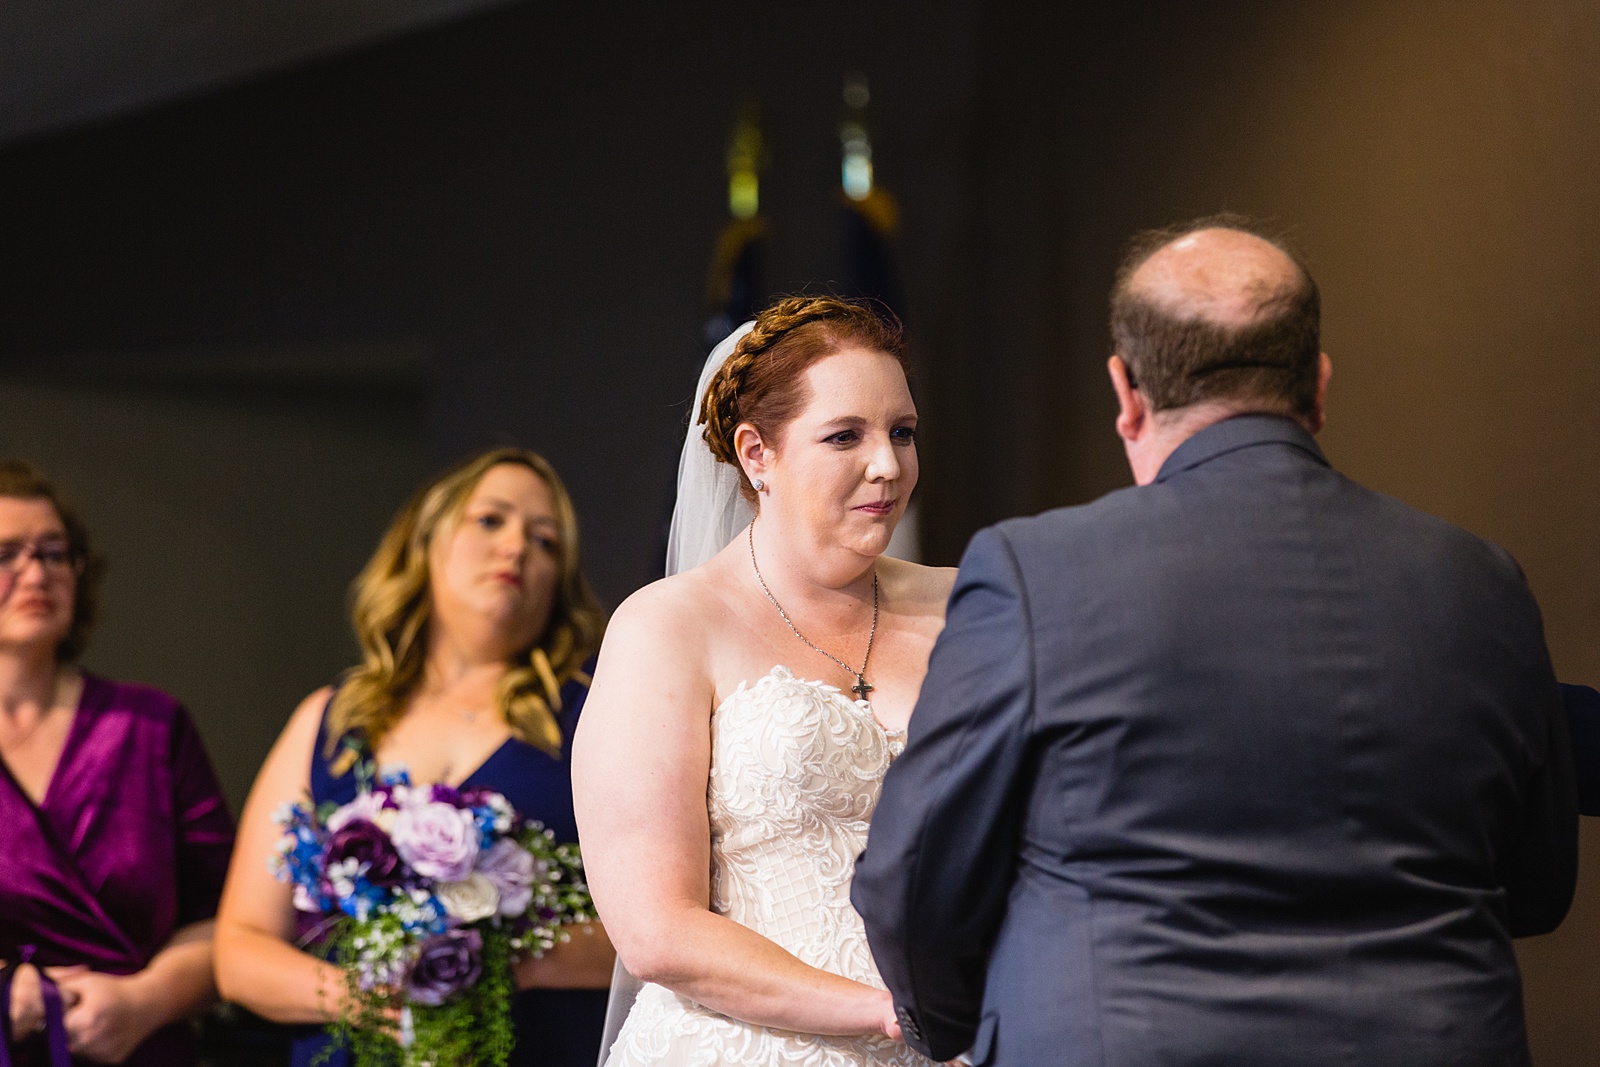 Bride looking at her groom during their wedding ceremony at Sun Valley Church by Tempe wedding photographer PMA Photography.